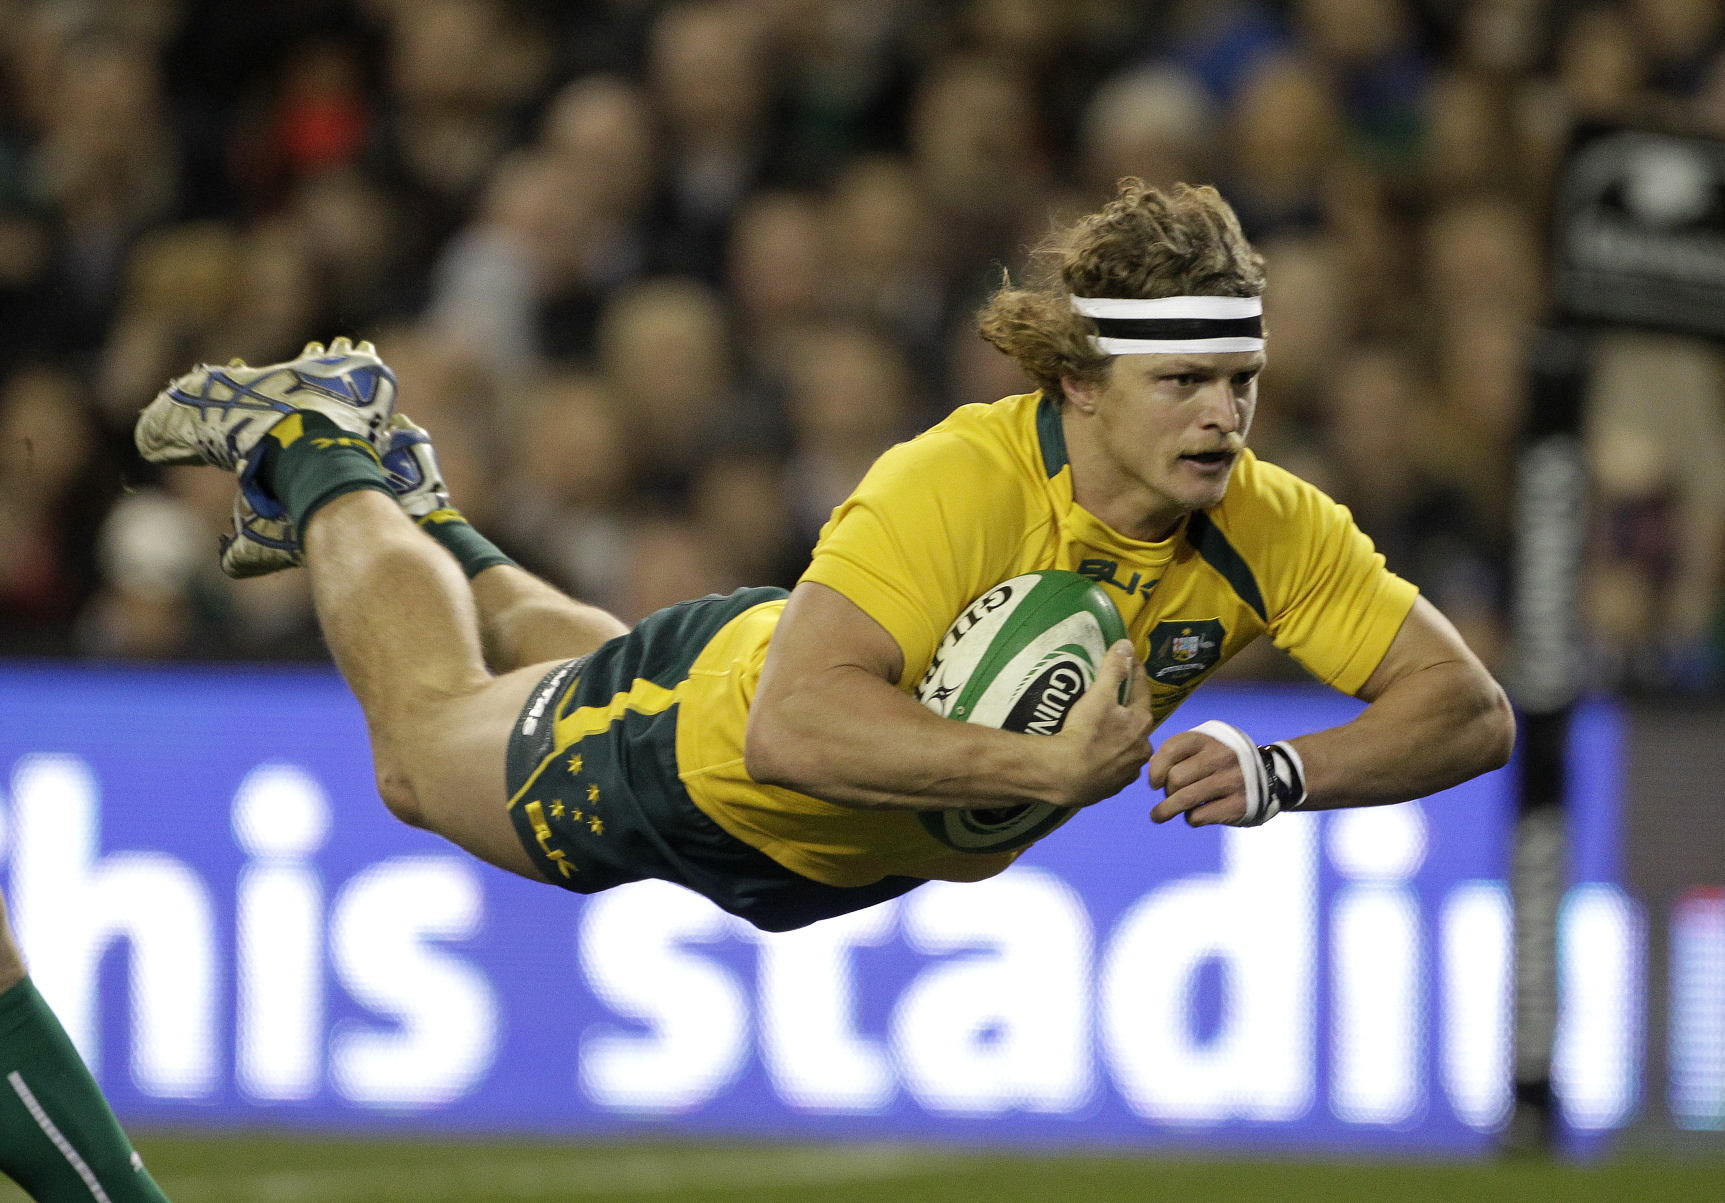 Former Wallaby Nick Cummins lines up for Barbarians against Australia